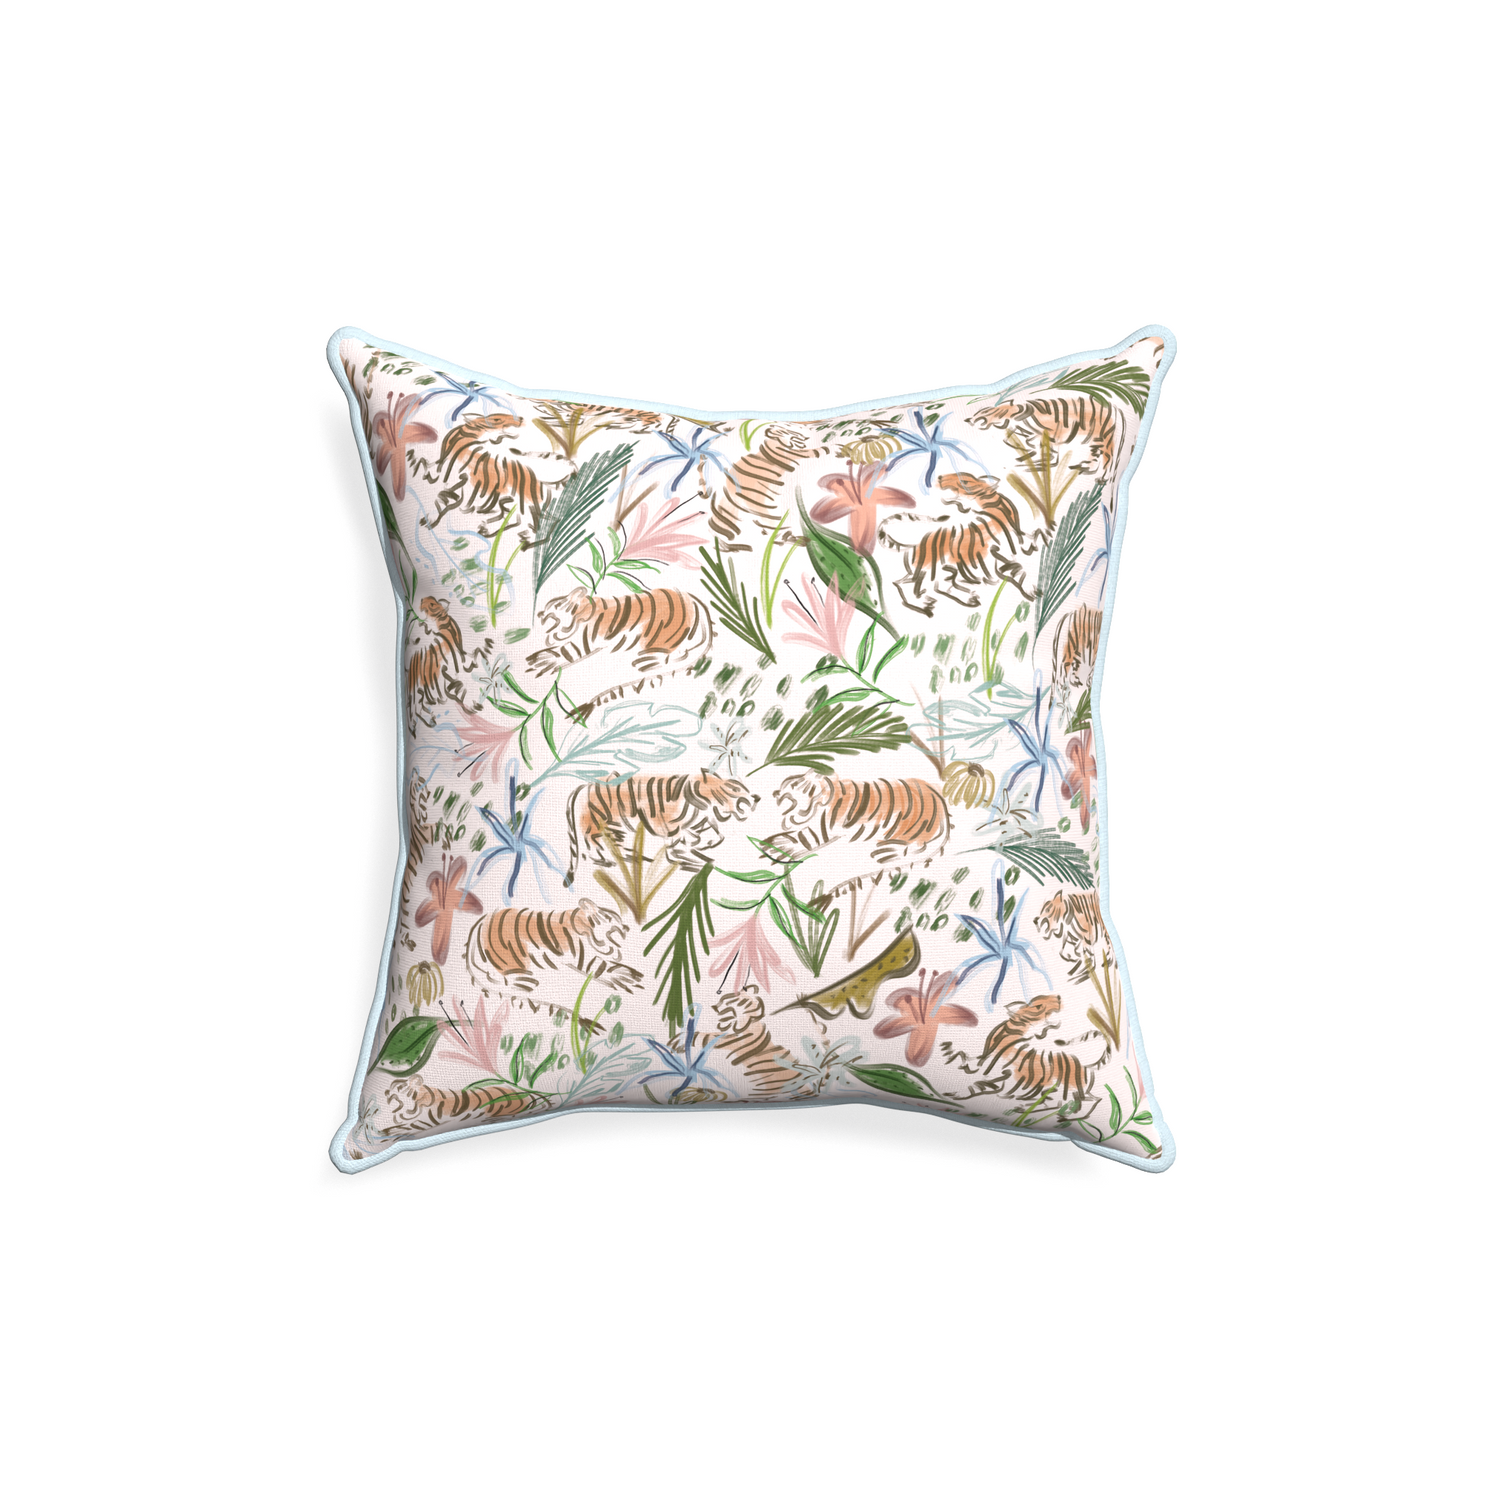 18-square frida pink custom pink chinoiserie tigerpillow with powder piping on white background